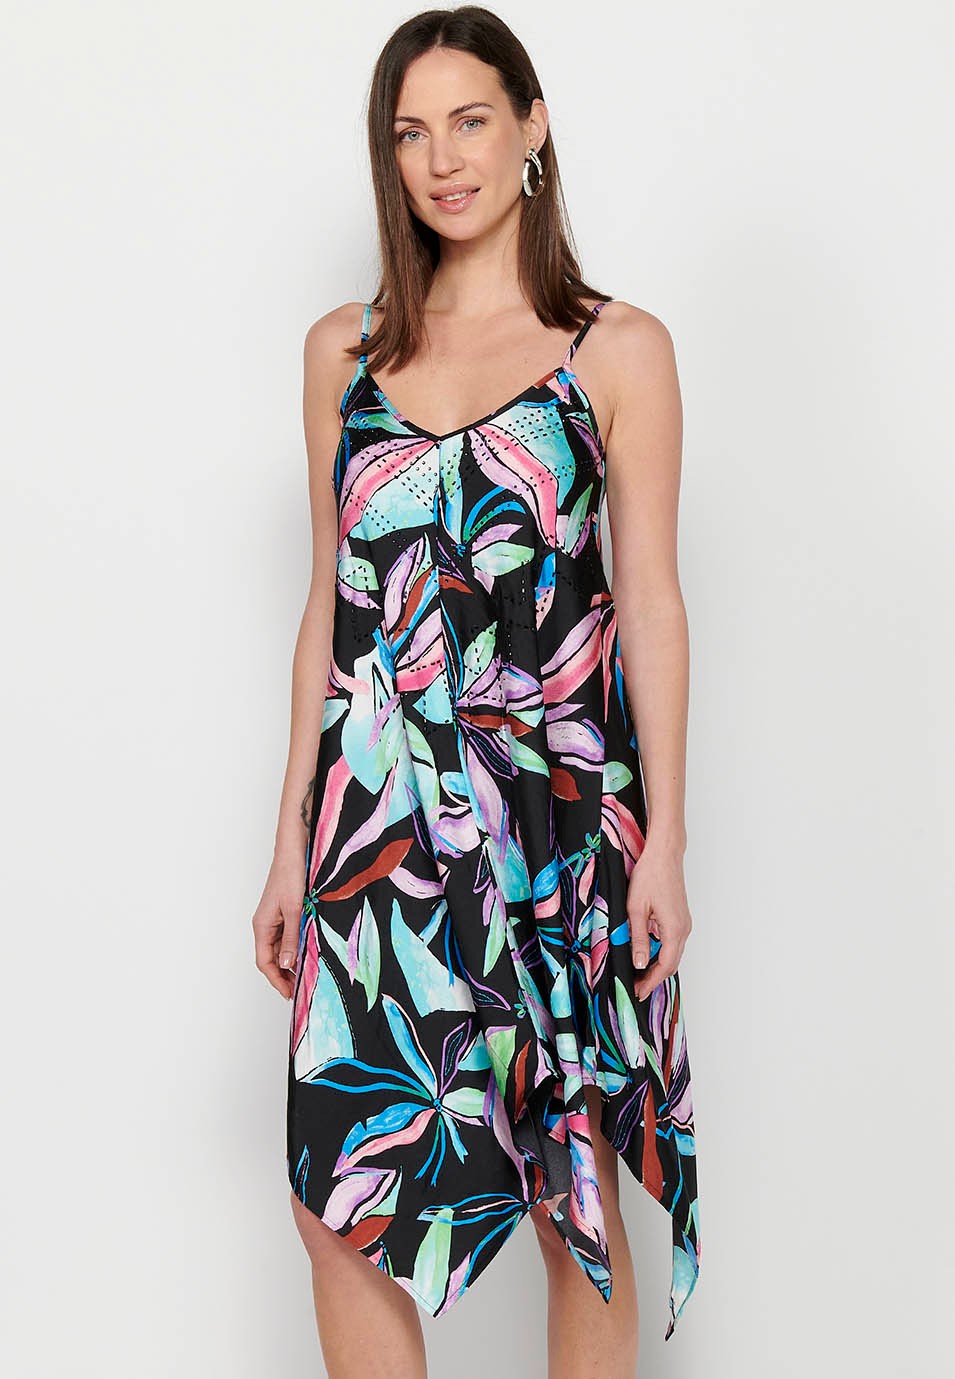 Midi dress with adjustable straps with sparkling neckline and long peaked finish with Multicolor floral print for Women 4